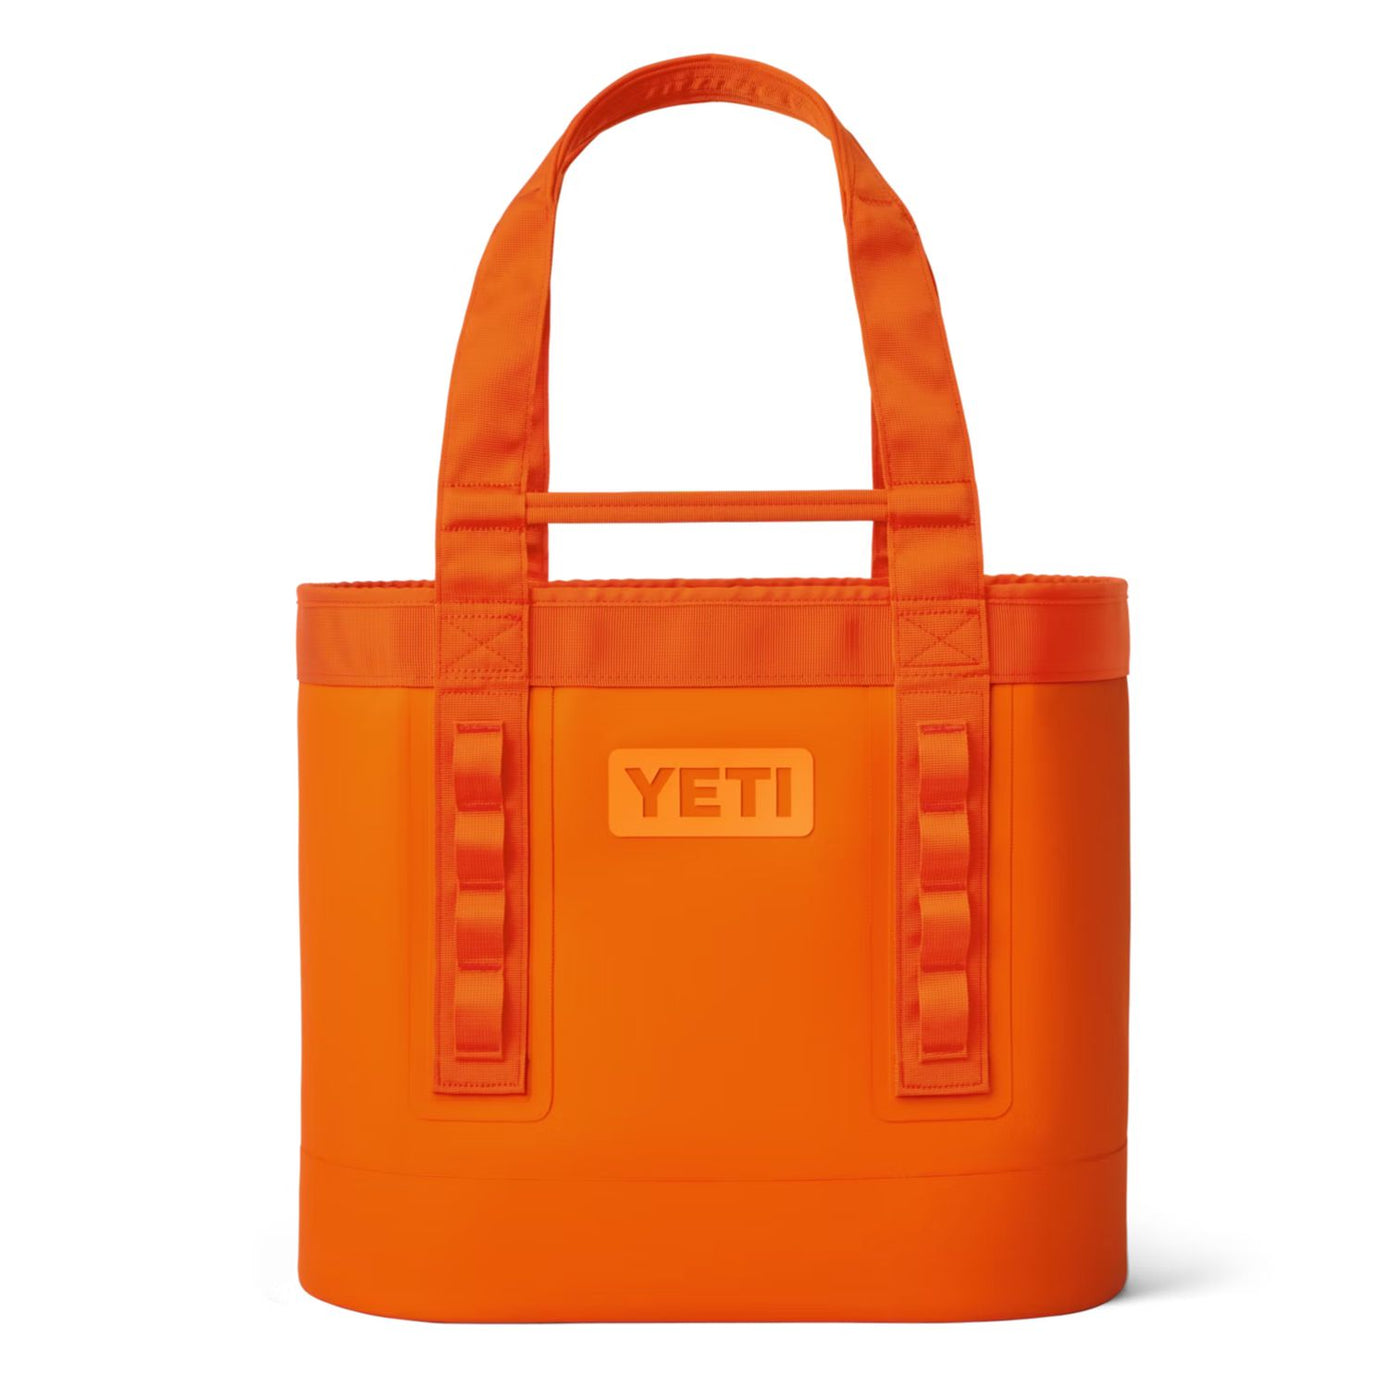 Yeti Camino CarryAll 35-Hunting/Outdoors-KING CRAB ORANGE-Kevin's Fine Outdoor Gear & Apparel